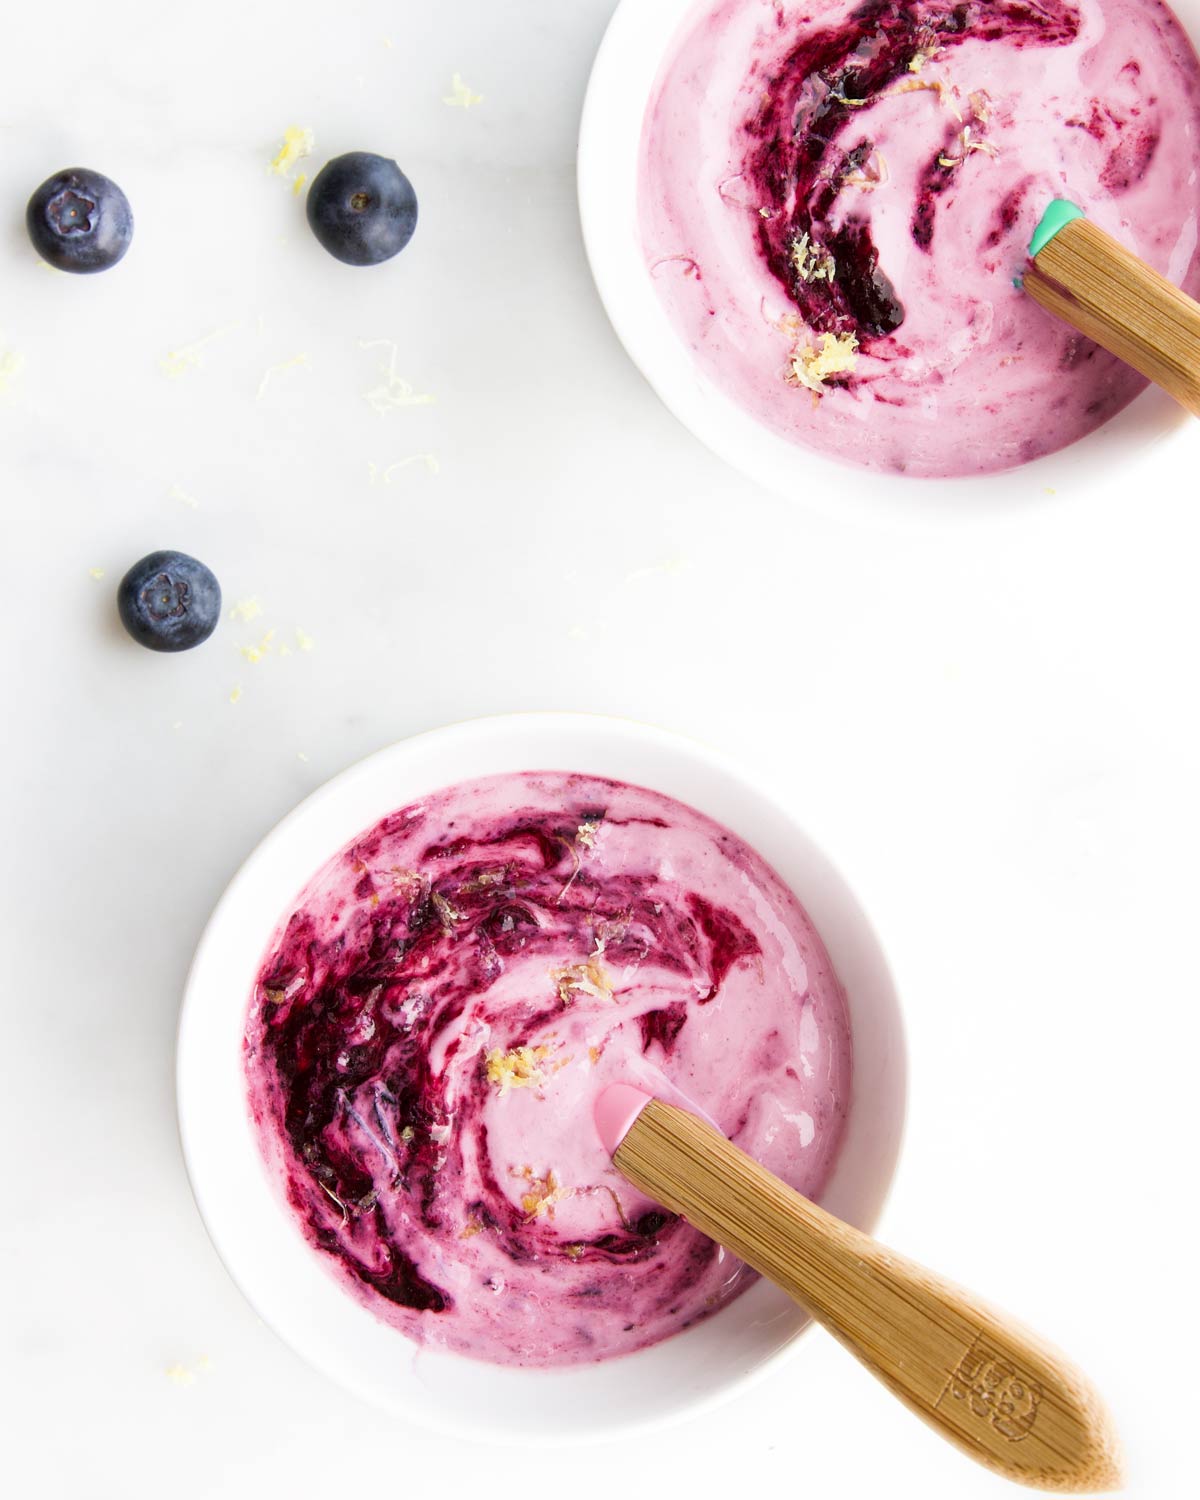 Two Small Bowls of Blueberry Yogurt with Blueberries Scattered